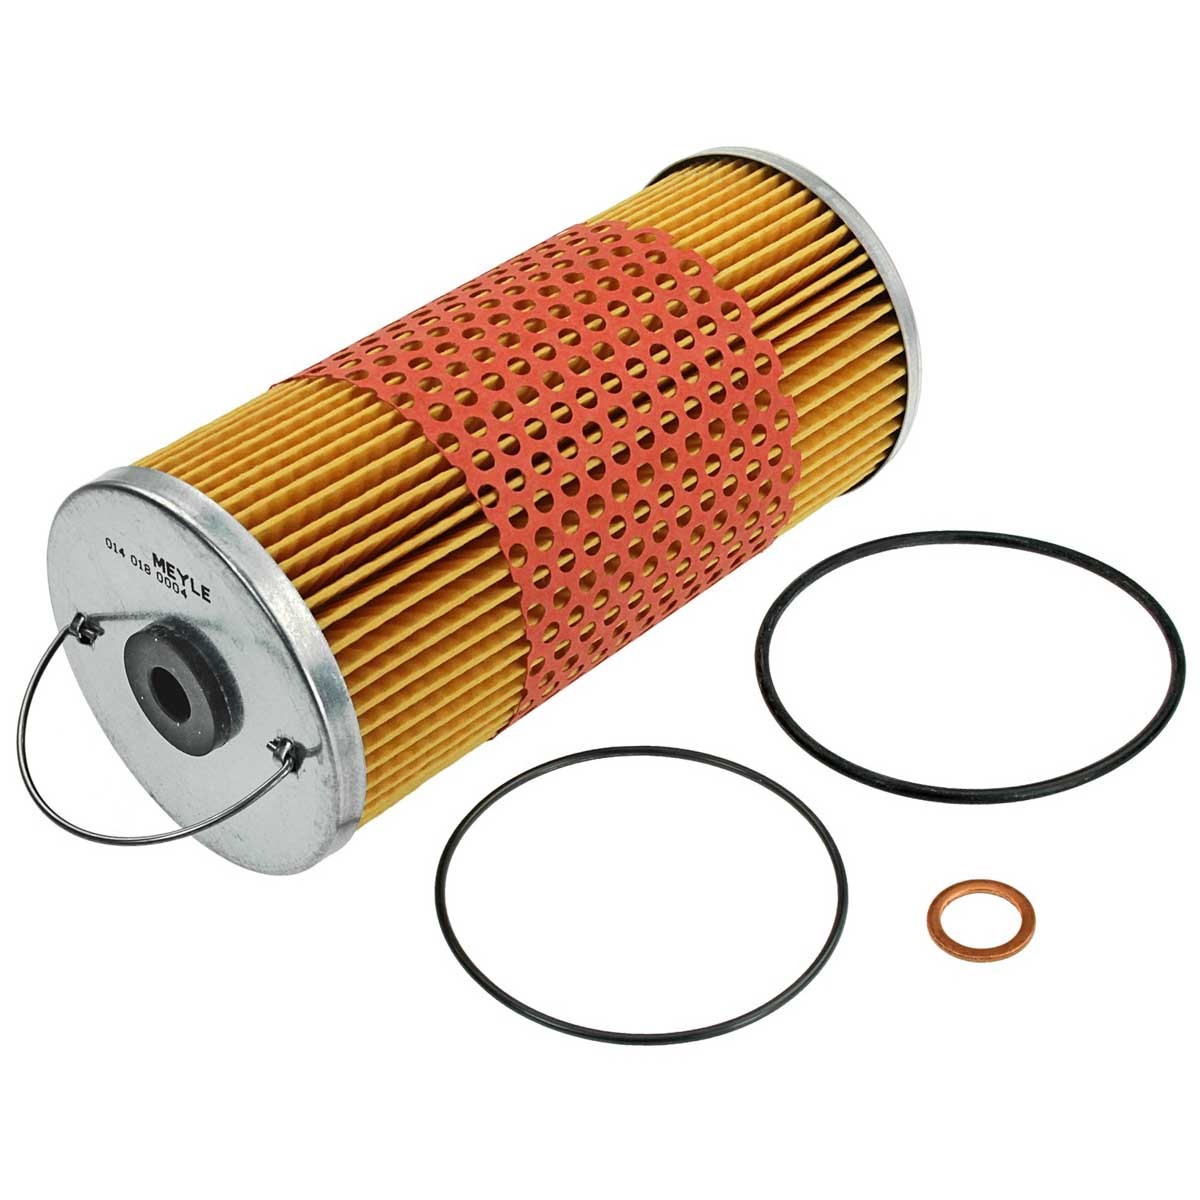 MEYLE 014 018 0004 Oil filter ORIGINAL Quality, with seal, Filter Insert